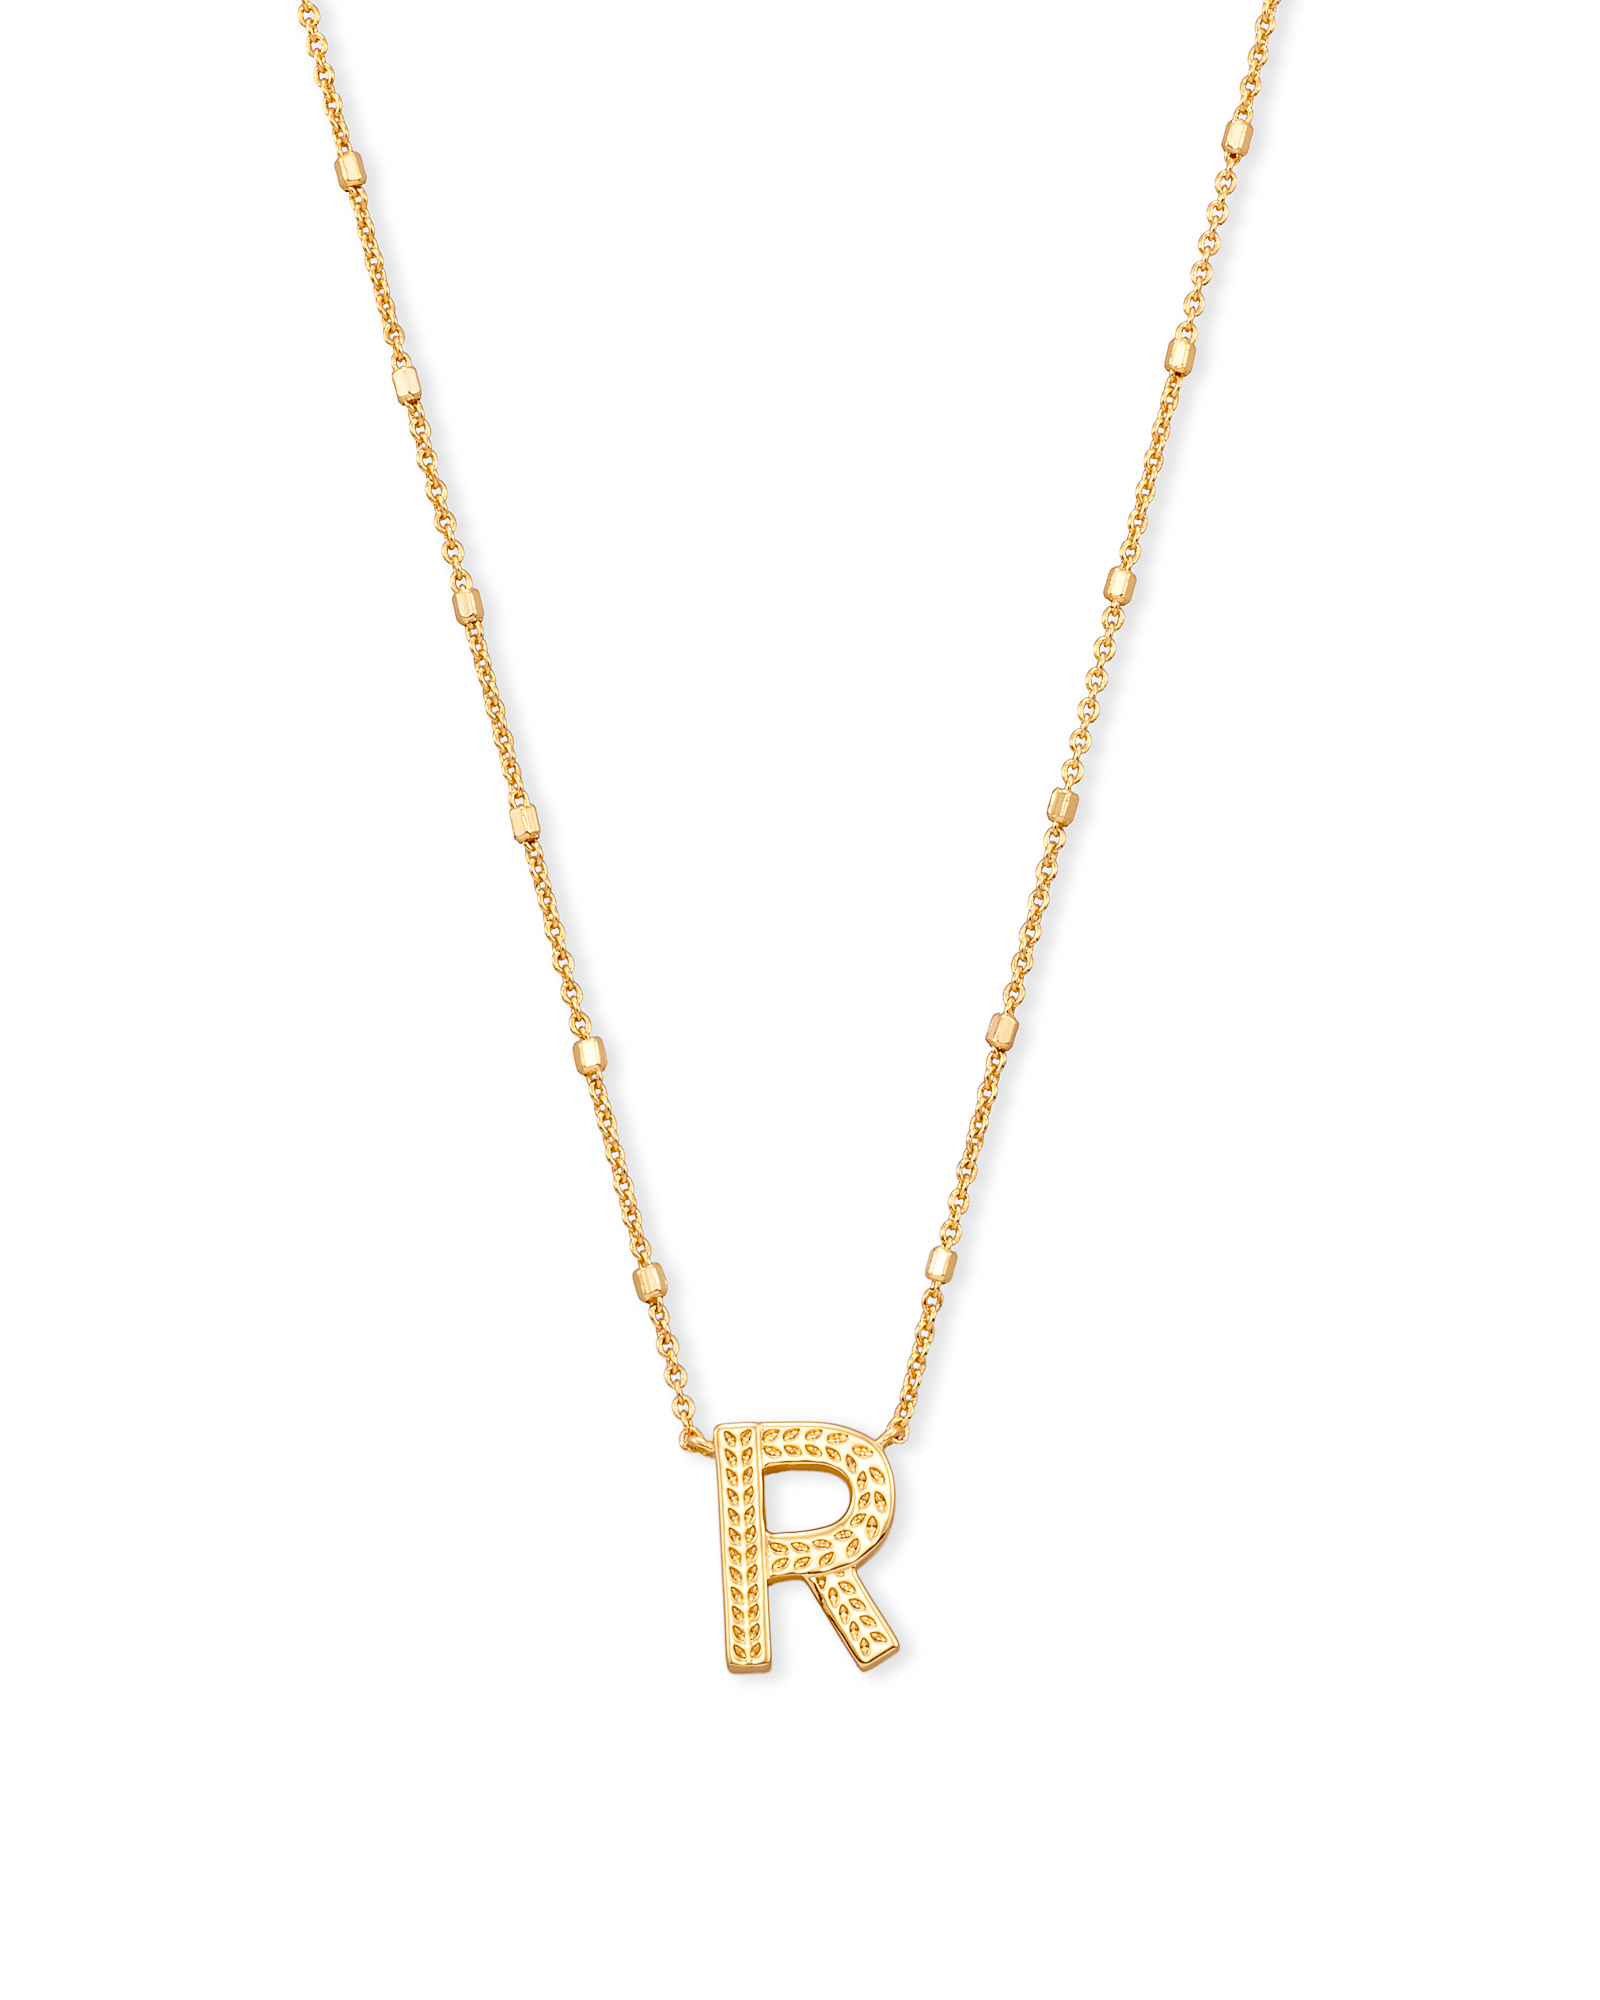 Initial R Necklace Adjustable 41-46cm/16-18' in 18k Gold Vermeil on  Sterling Silver | Jewellery by Monica Vinader